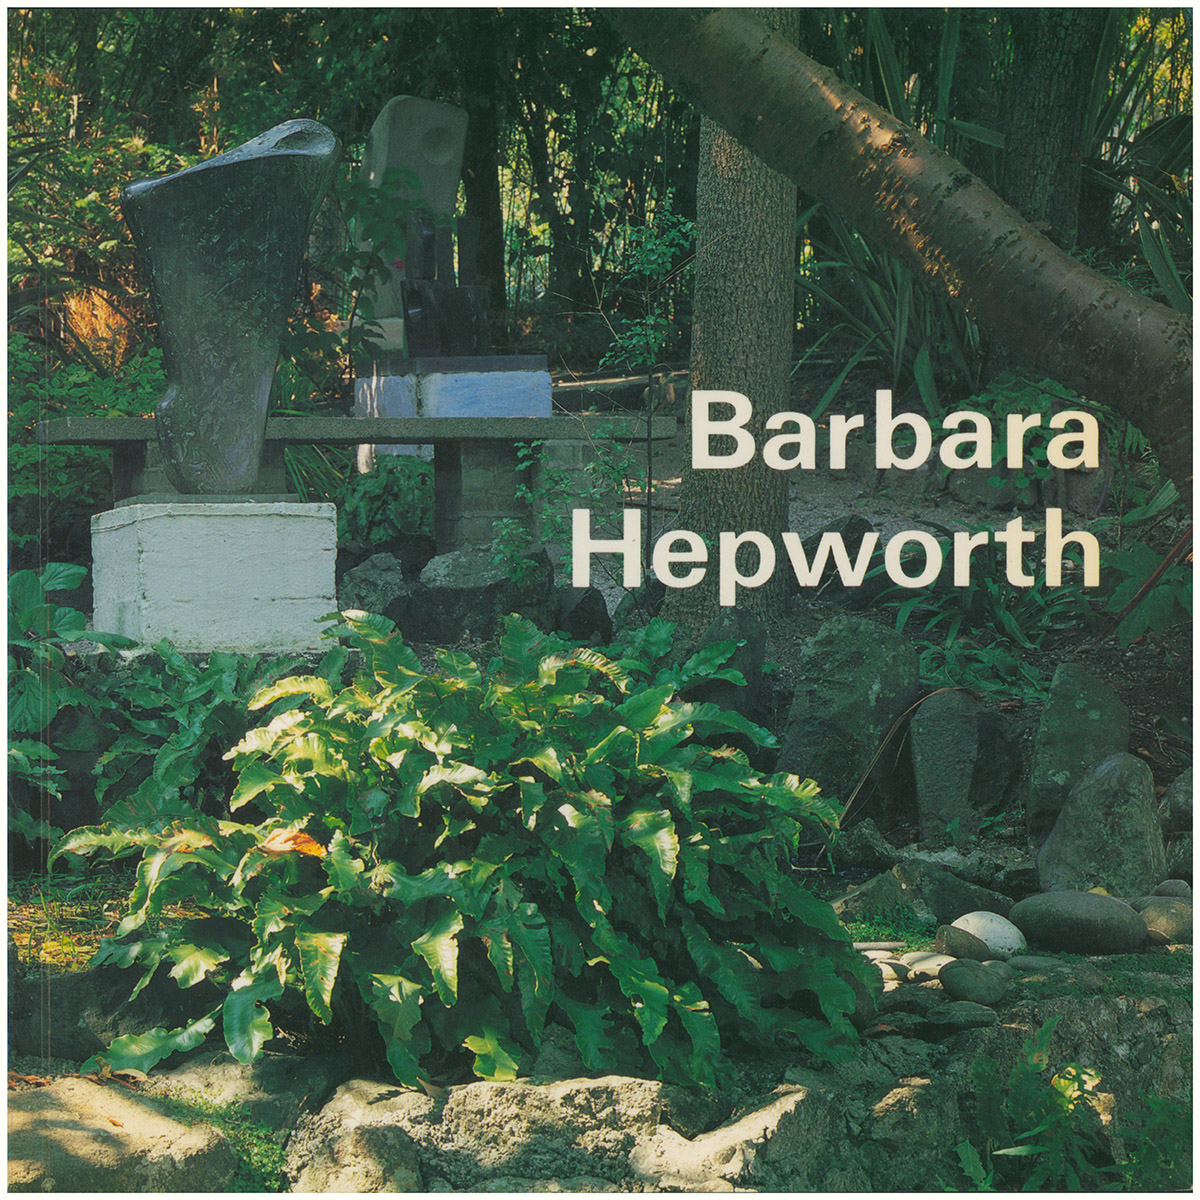 Bowness, Alan; Fraser Jenkins, David - Barbara Hepworth: A Guide to the Tate Gallery Collection at London and St. Ives, Cornwall